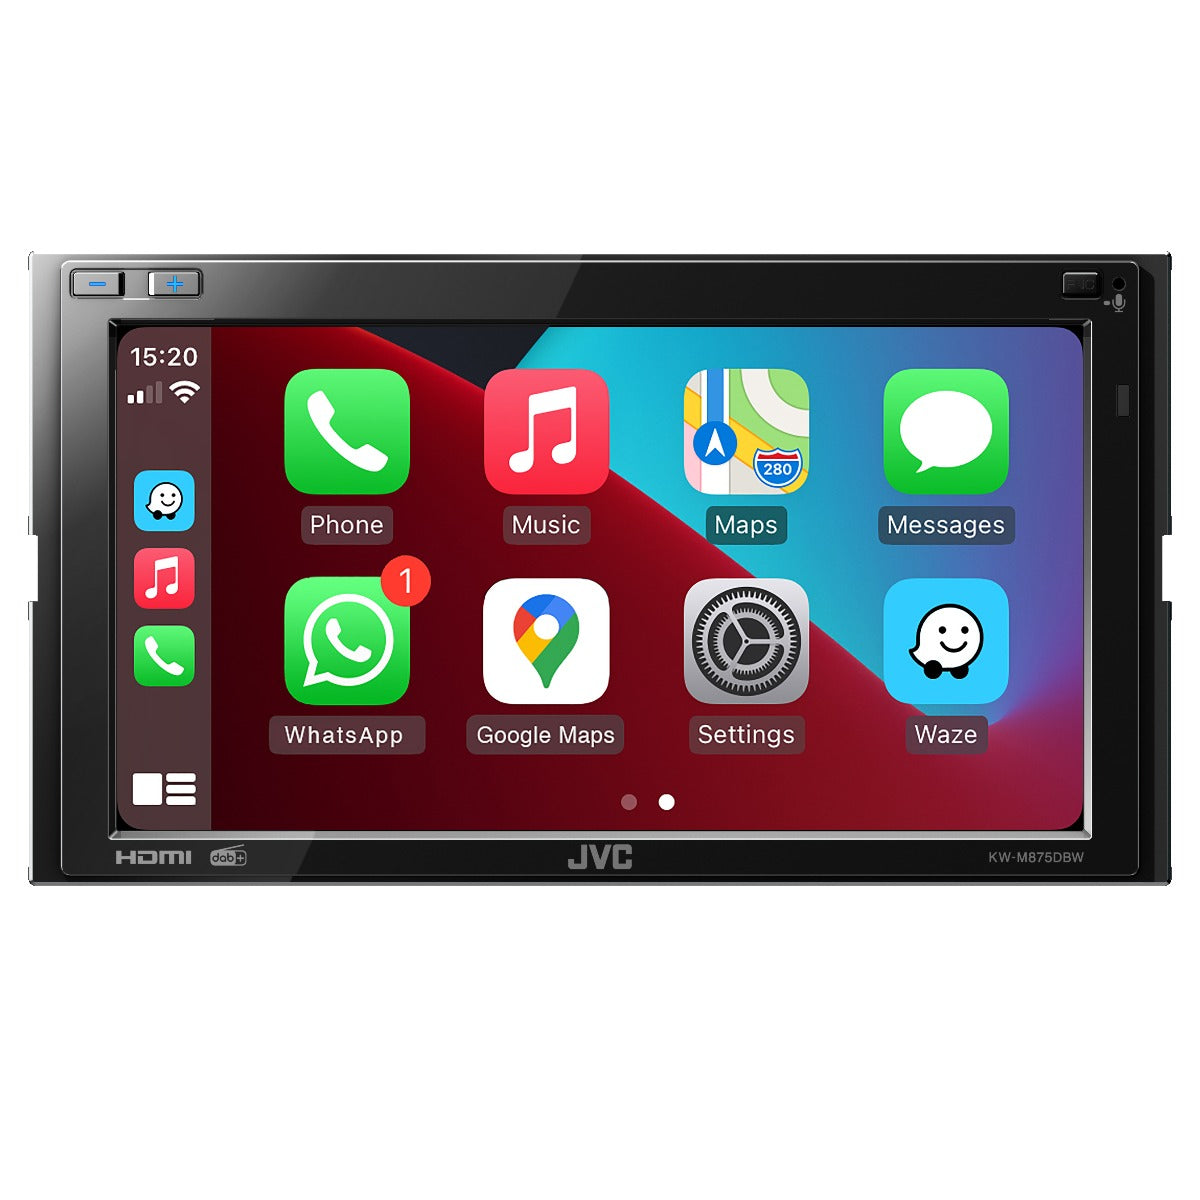 JVC KW-M875DBW Car Stereo with 6.8" Display, Apple CarPlay, Android Auto, DAB and Bluetooth